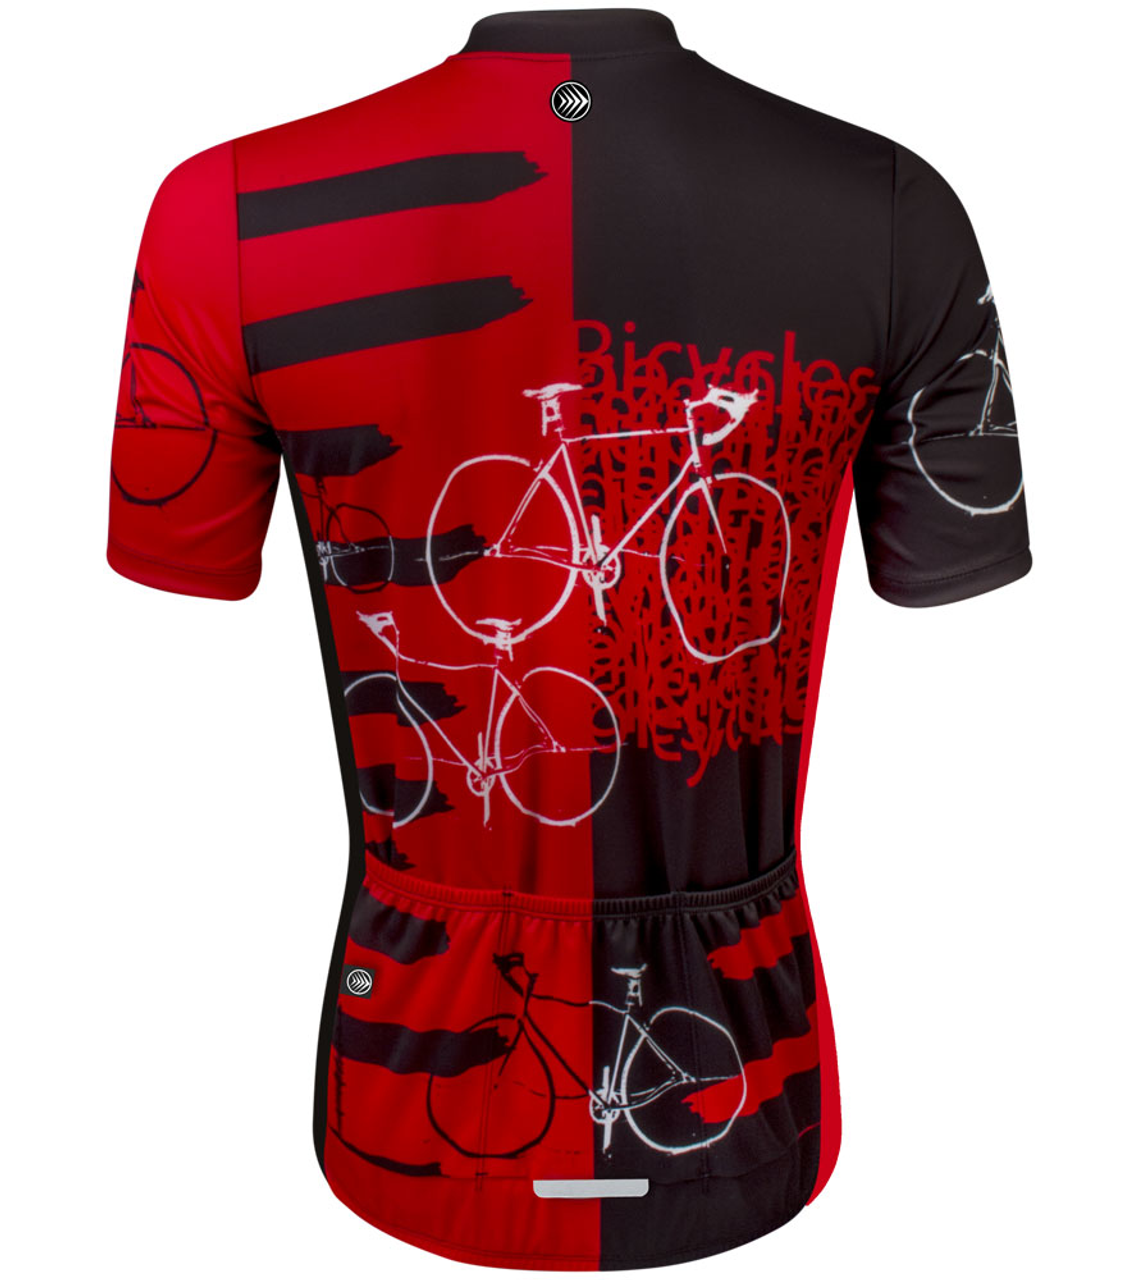 Aero Tech Tall Man Expressions Cycling Jersey Made in USA